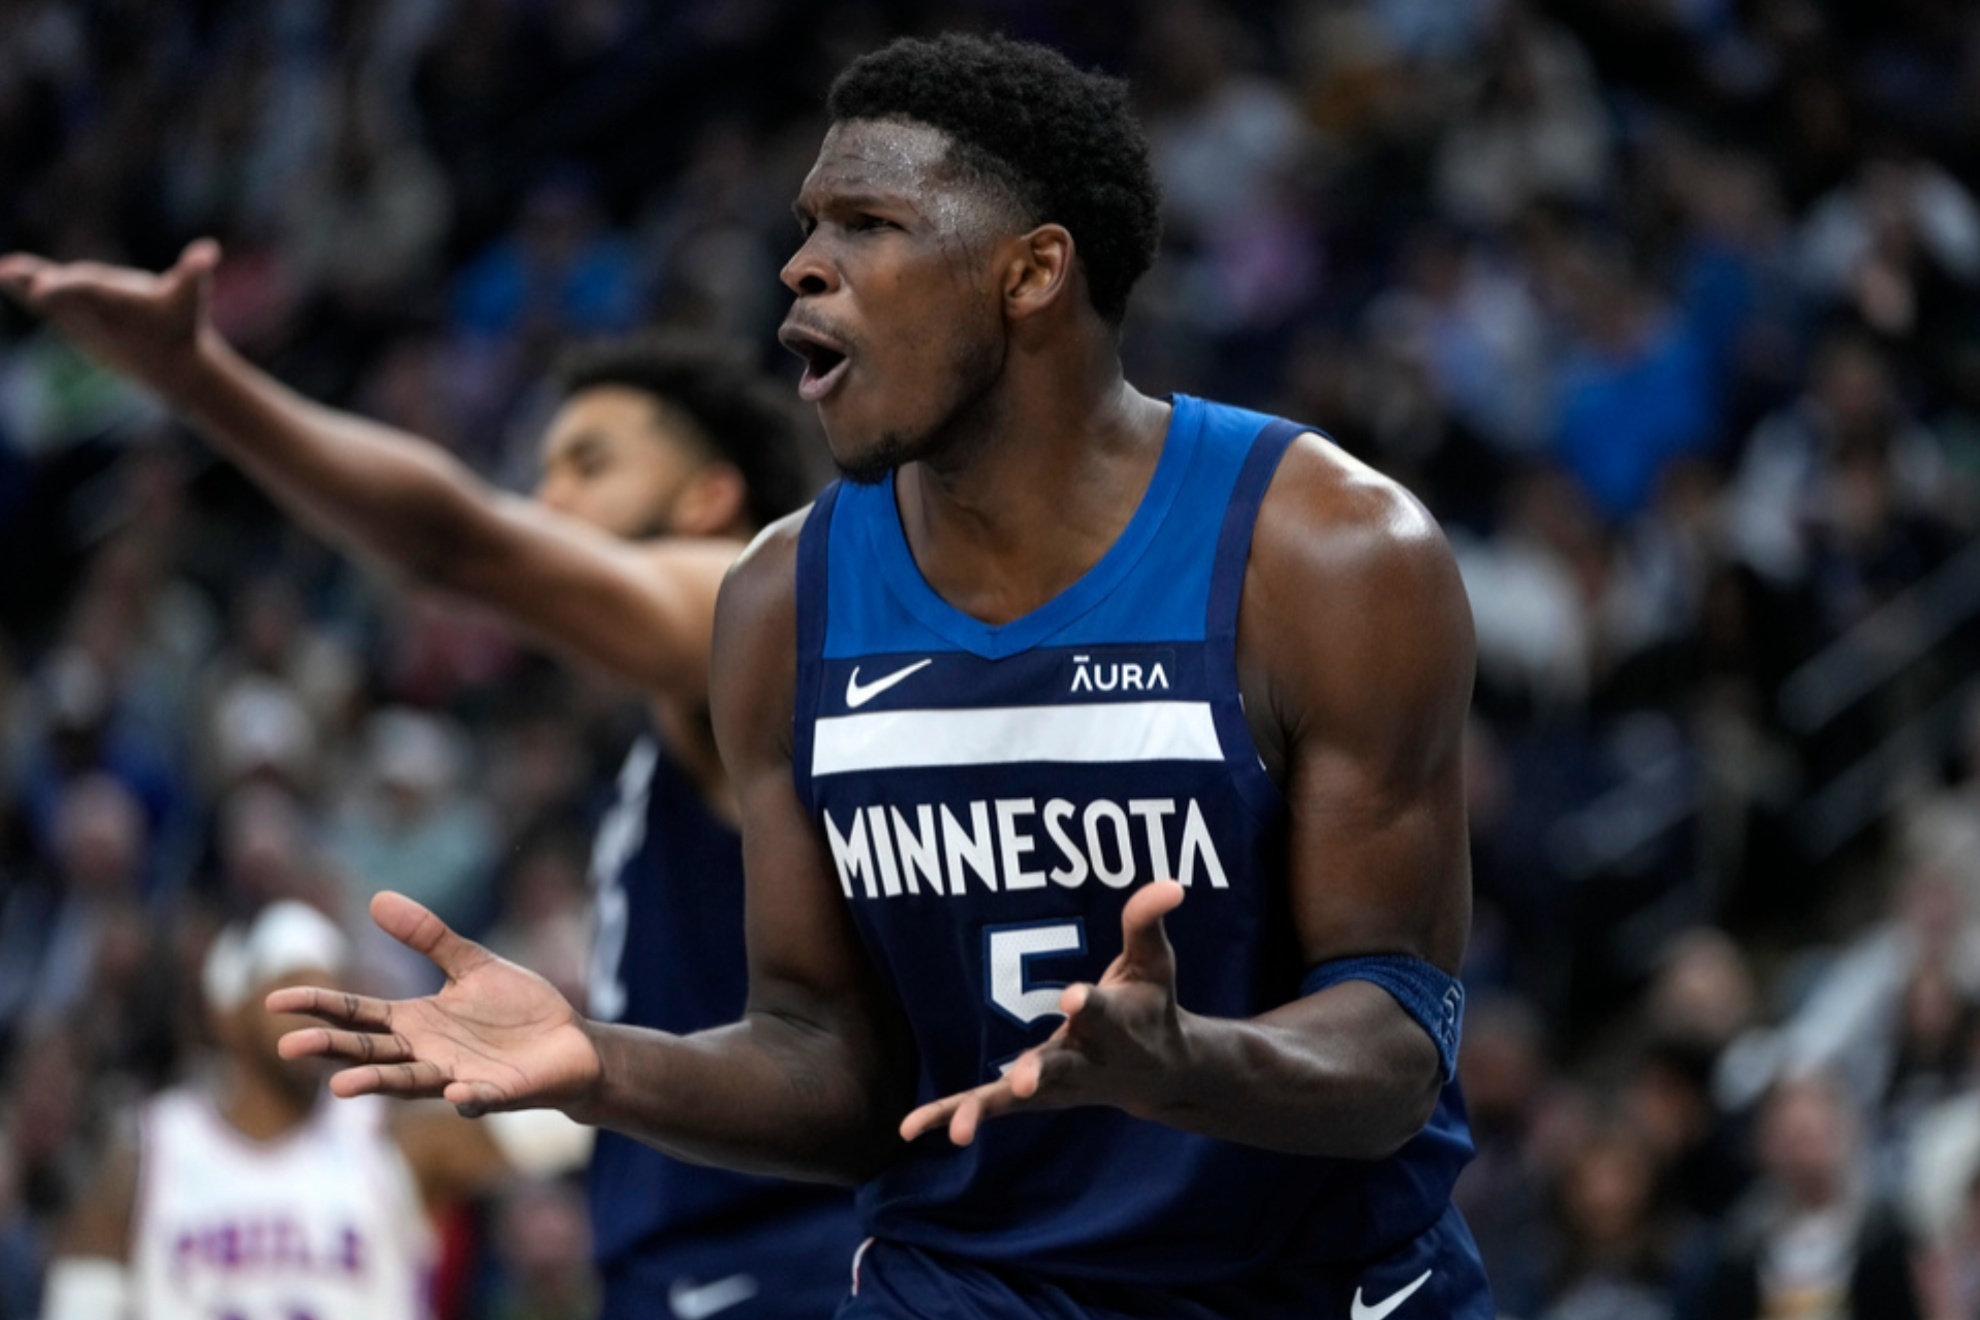 Minnesota Timberwolves star Anthony Edwards is facing a scandal involving an Instagram model